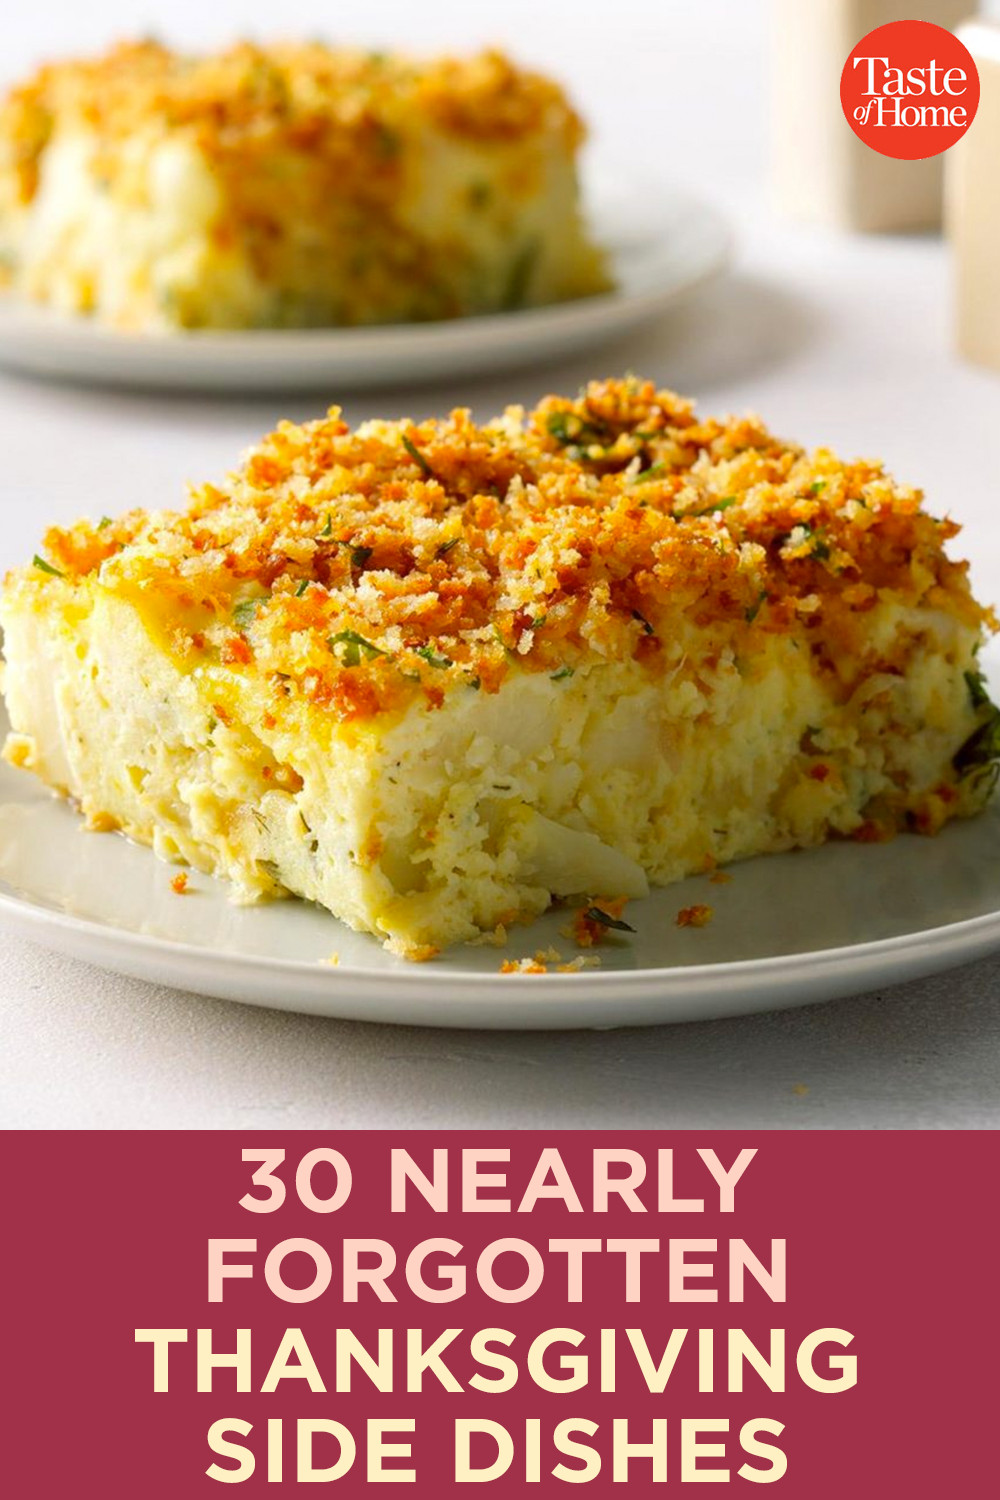 Gourmet Thanksgiving Side Dishes
 30 Nearly Forgotten Thanksgiving Side Dishes